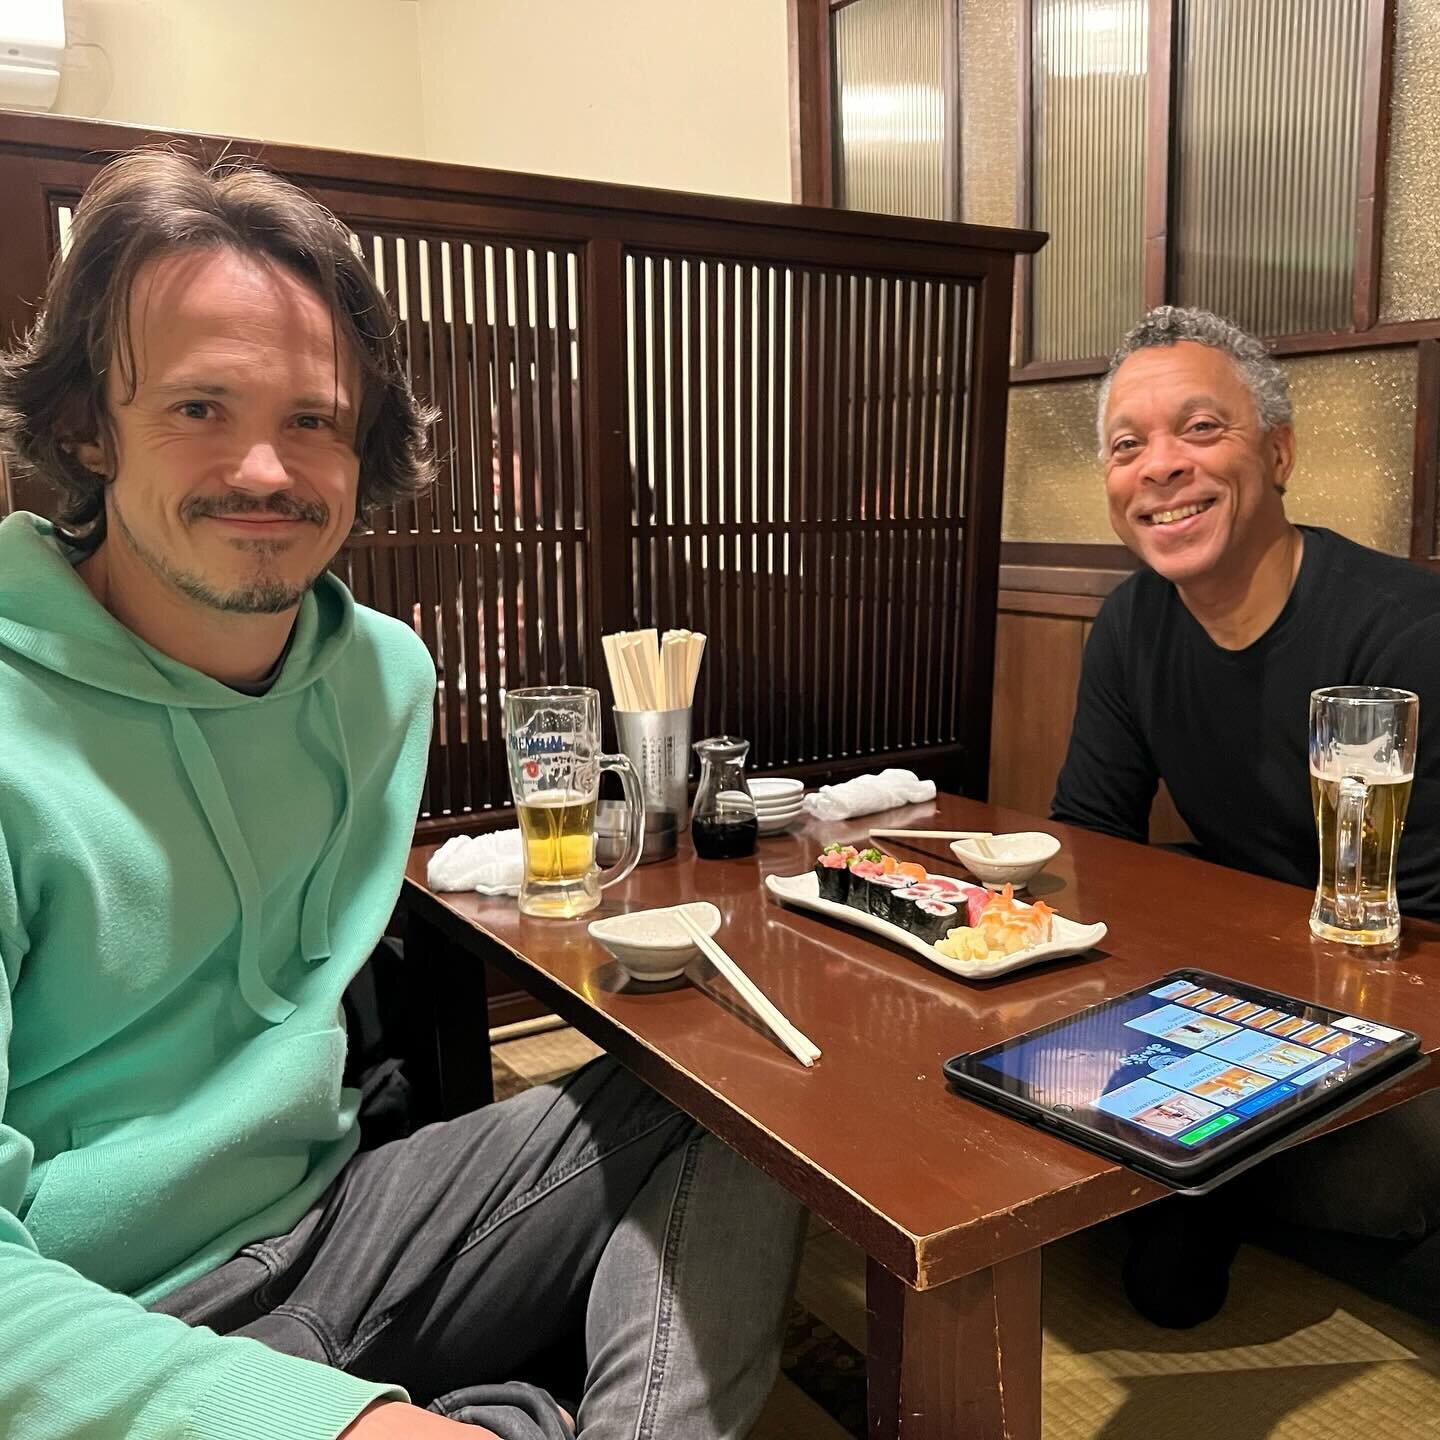 Dinner in Yokohama with designer [capital D] and artist [capital A] @rayhoracek_chasingnature. In the two decades that I have known him, Ray has always forged the frontier of creativity, innovation and where the two intersect. Always inspiring, what 